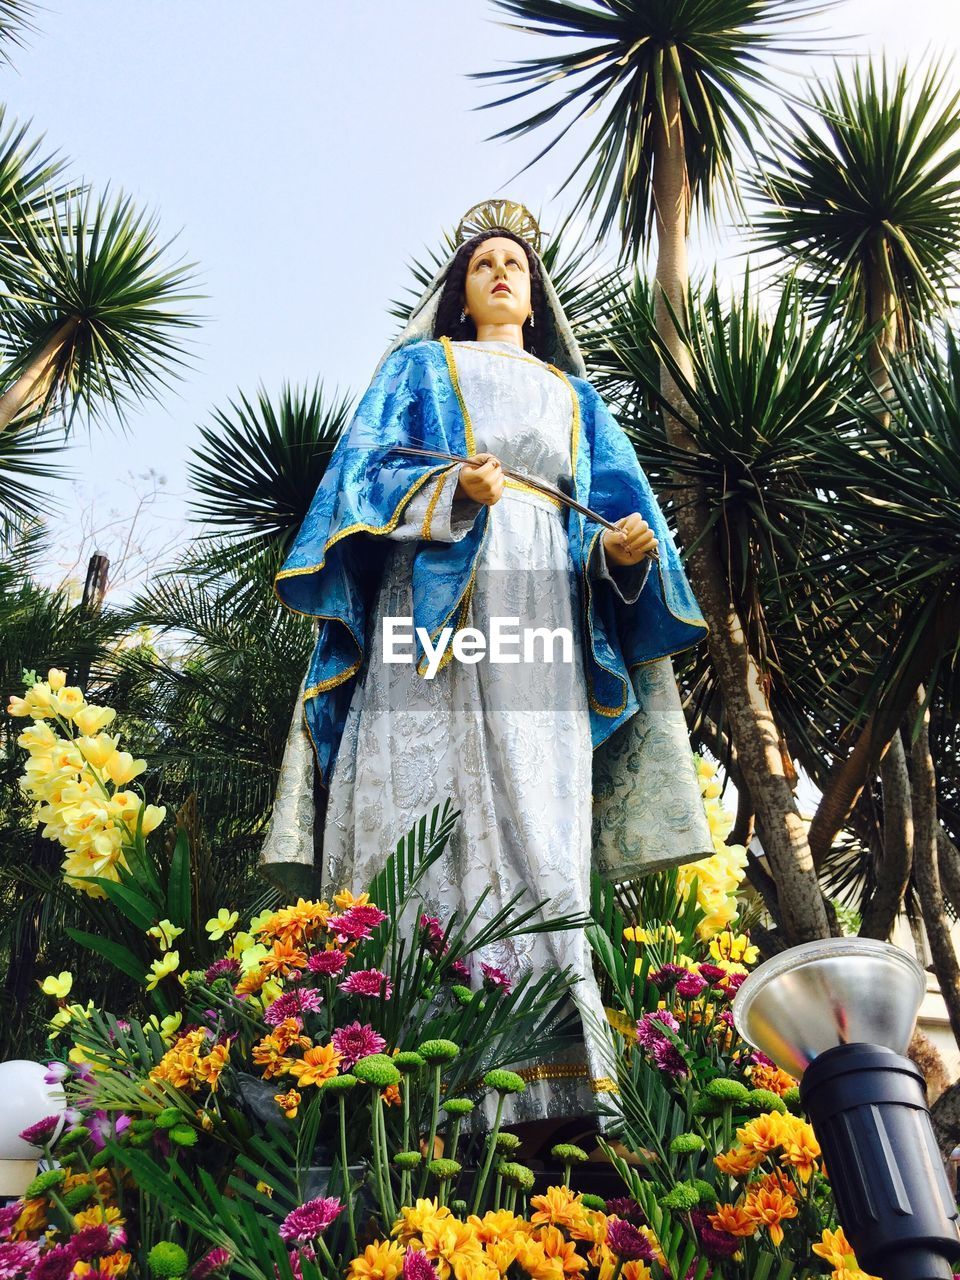 Bouquets around virgin mary statue against trees outside church